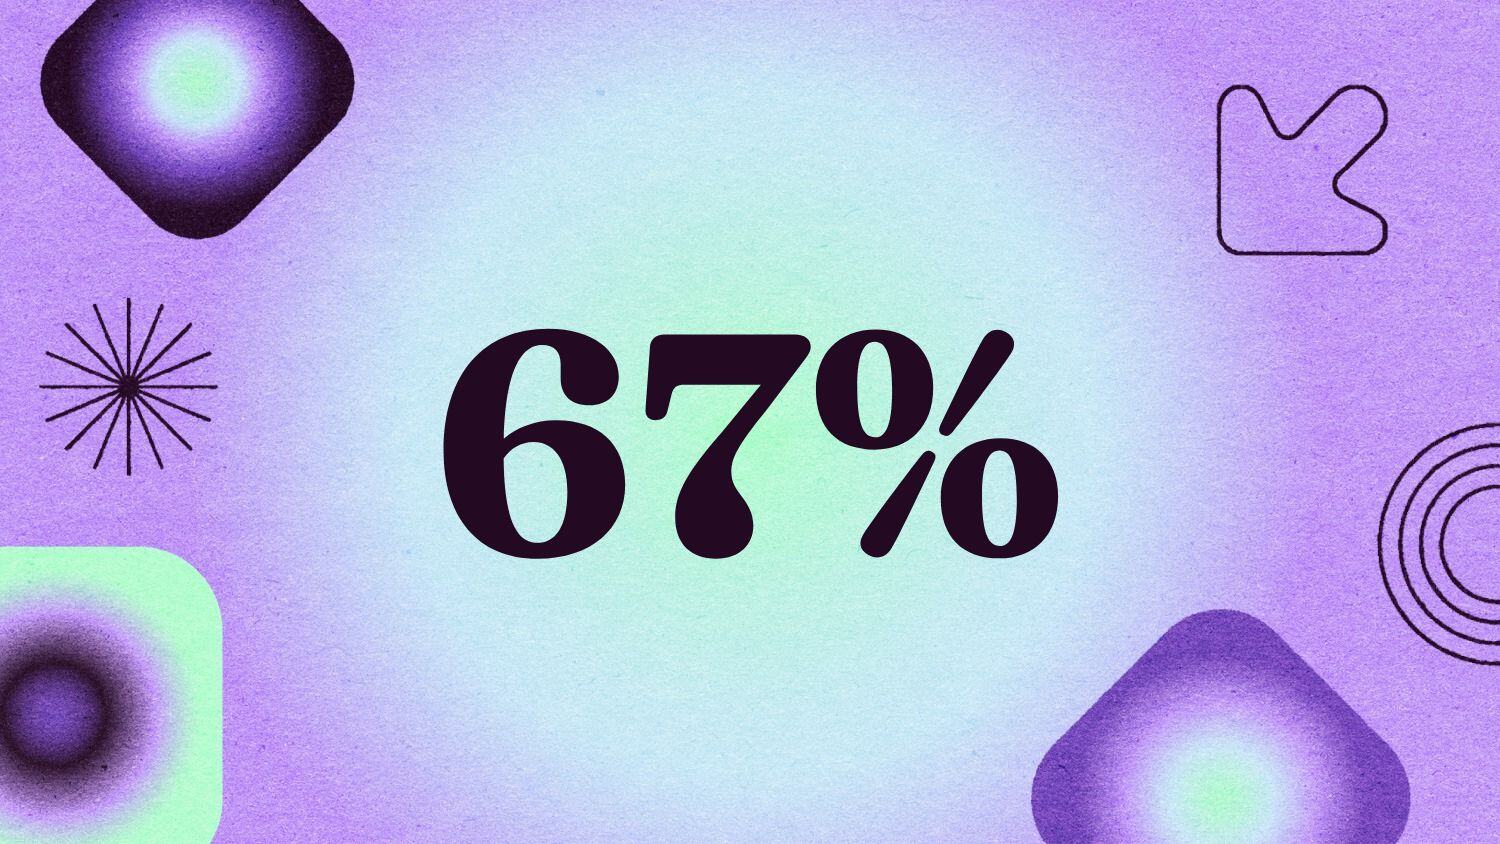 Graphic with the text '67%' 